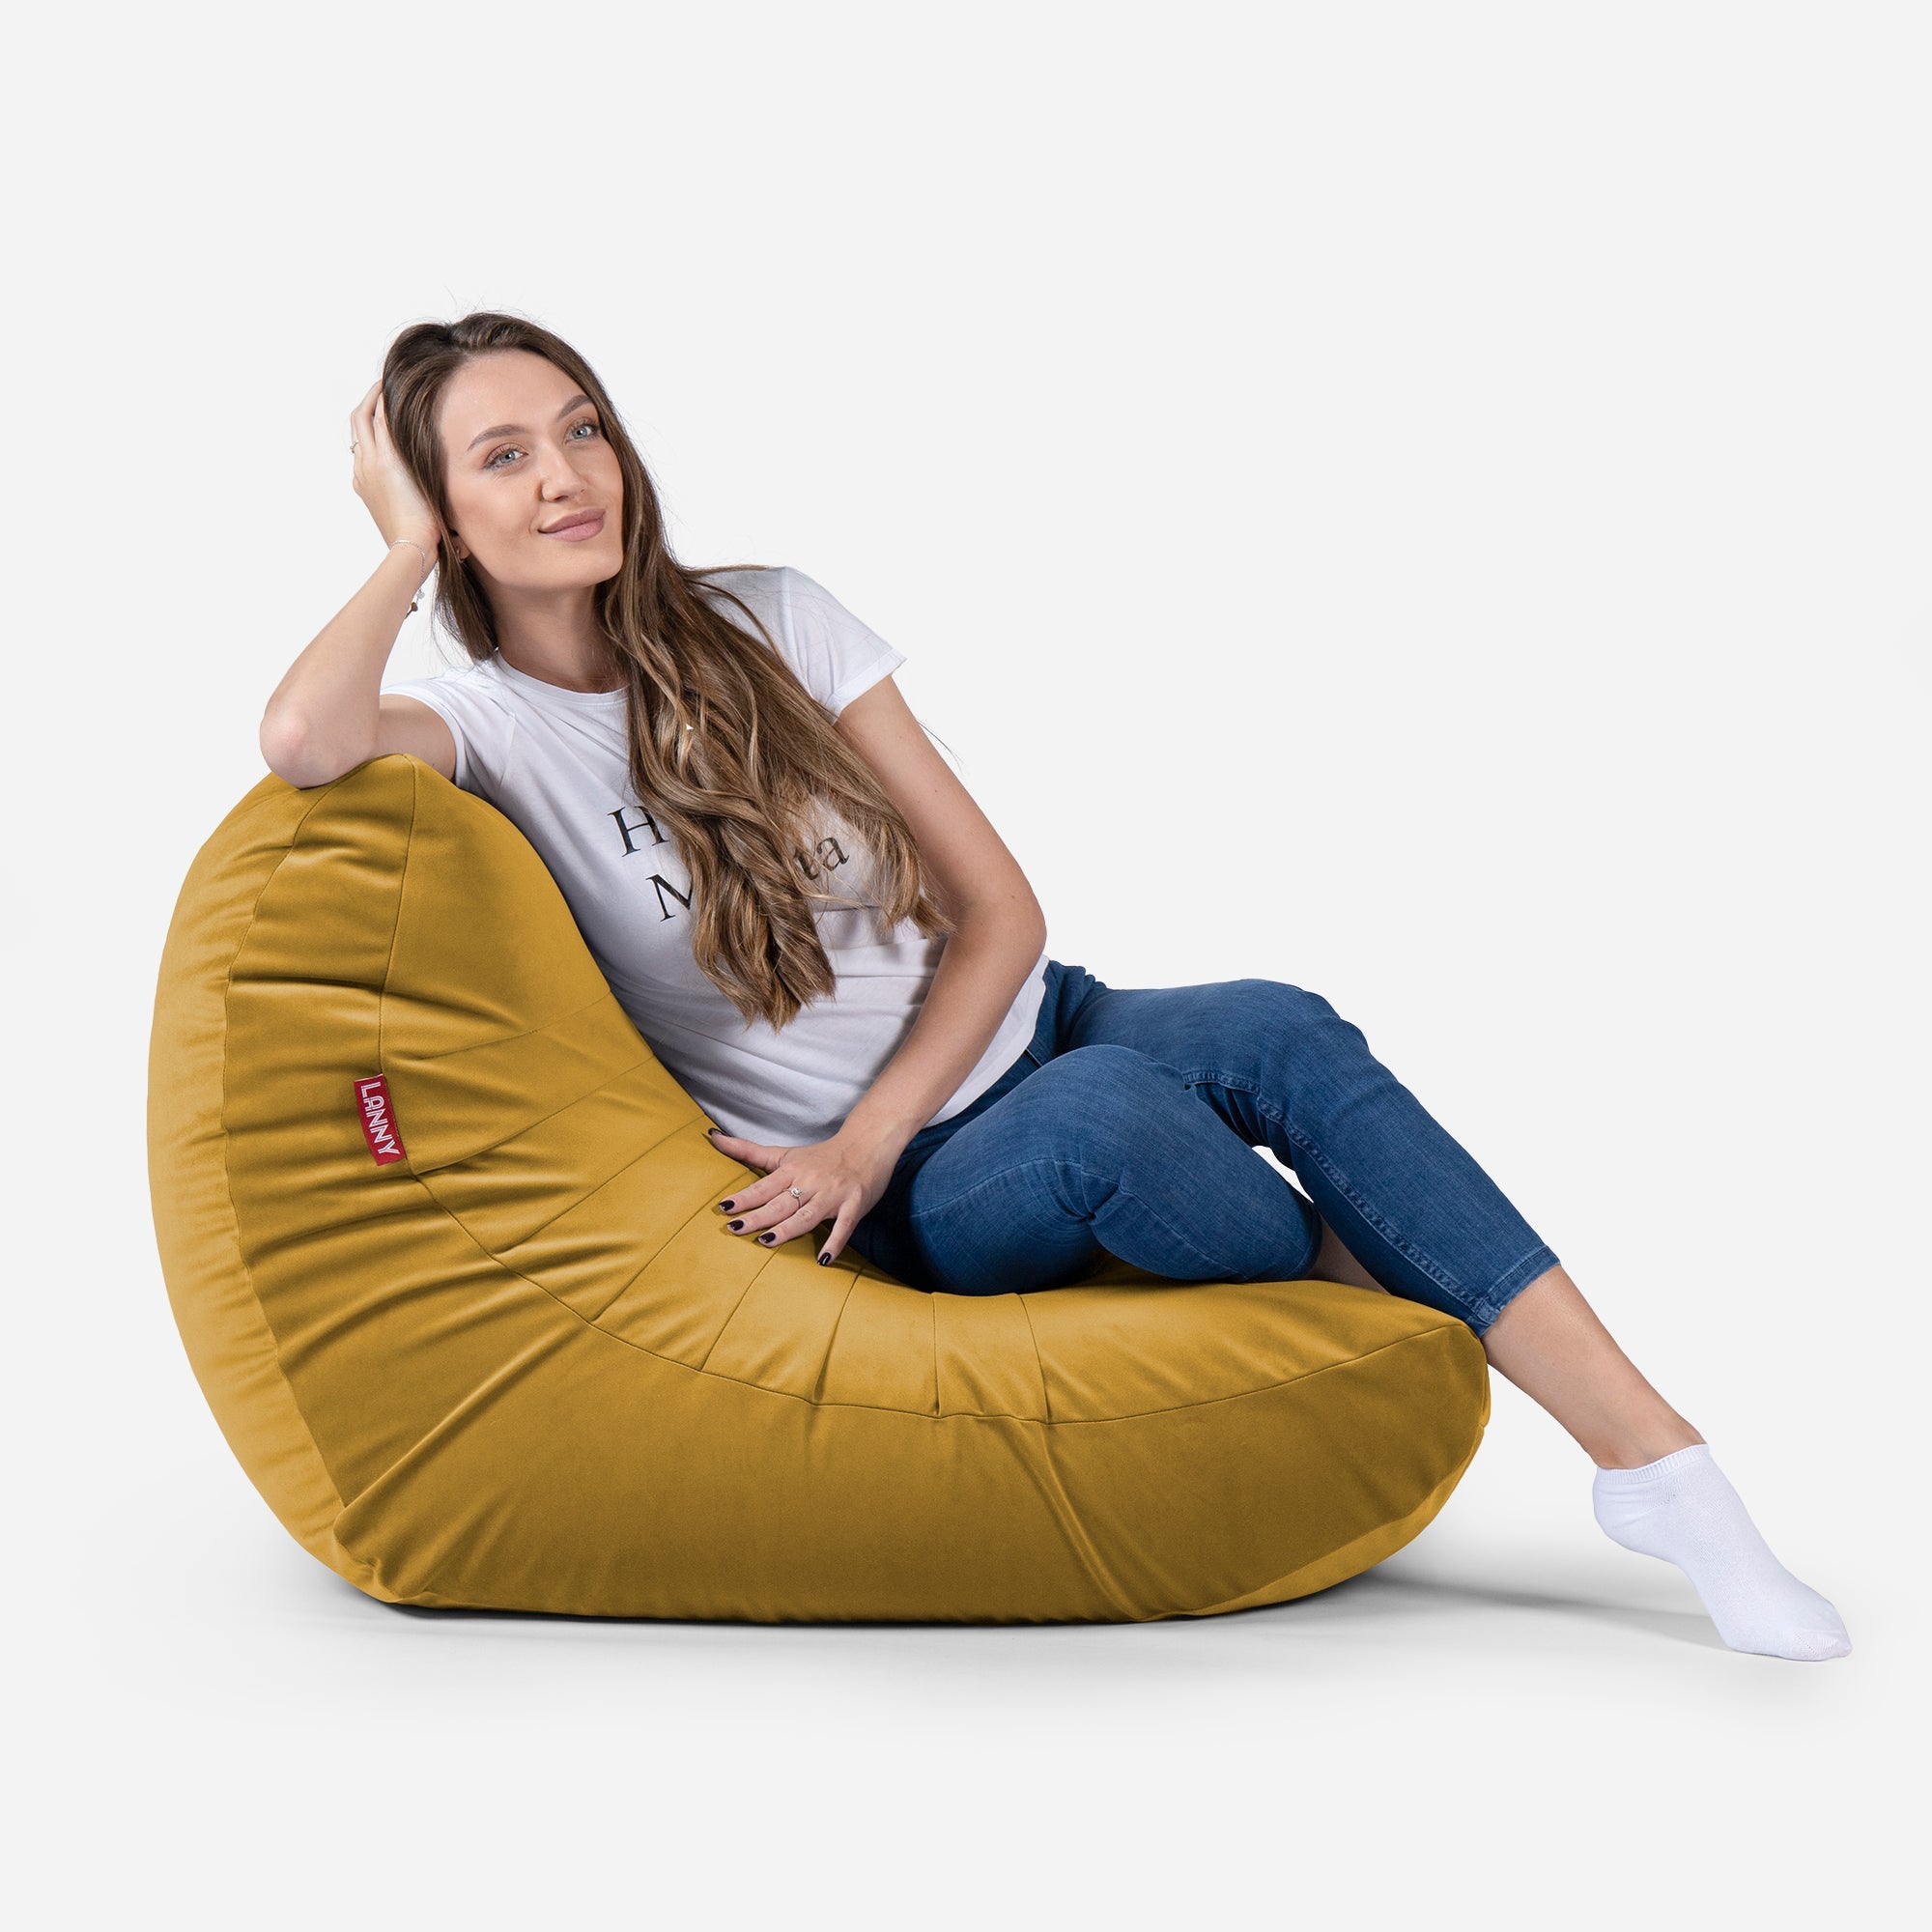 Beanbag Mustard color with girl seating on it